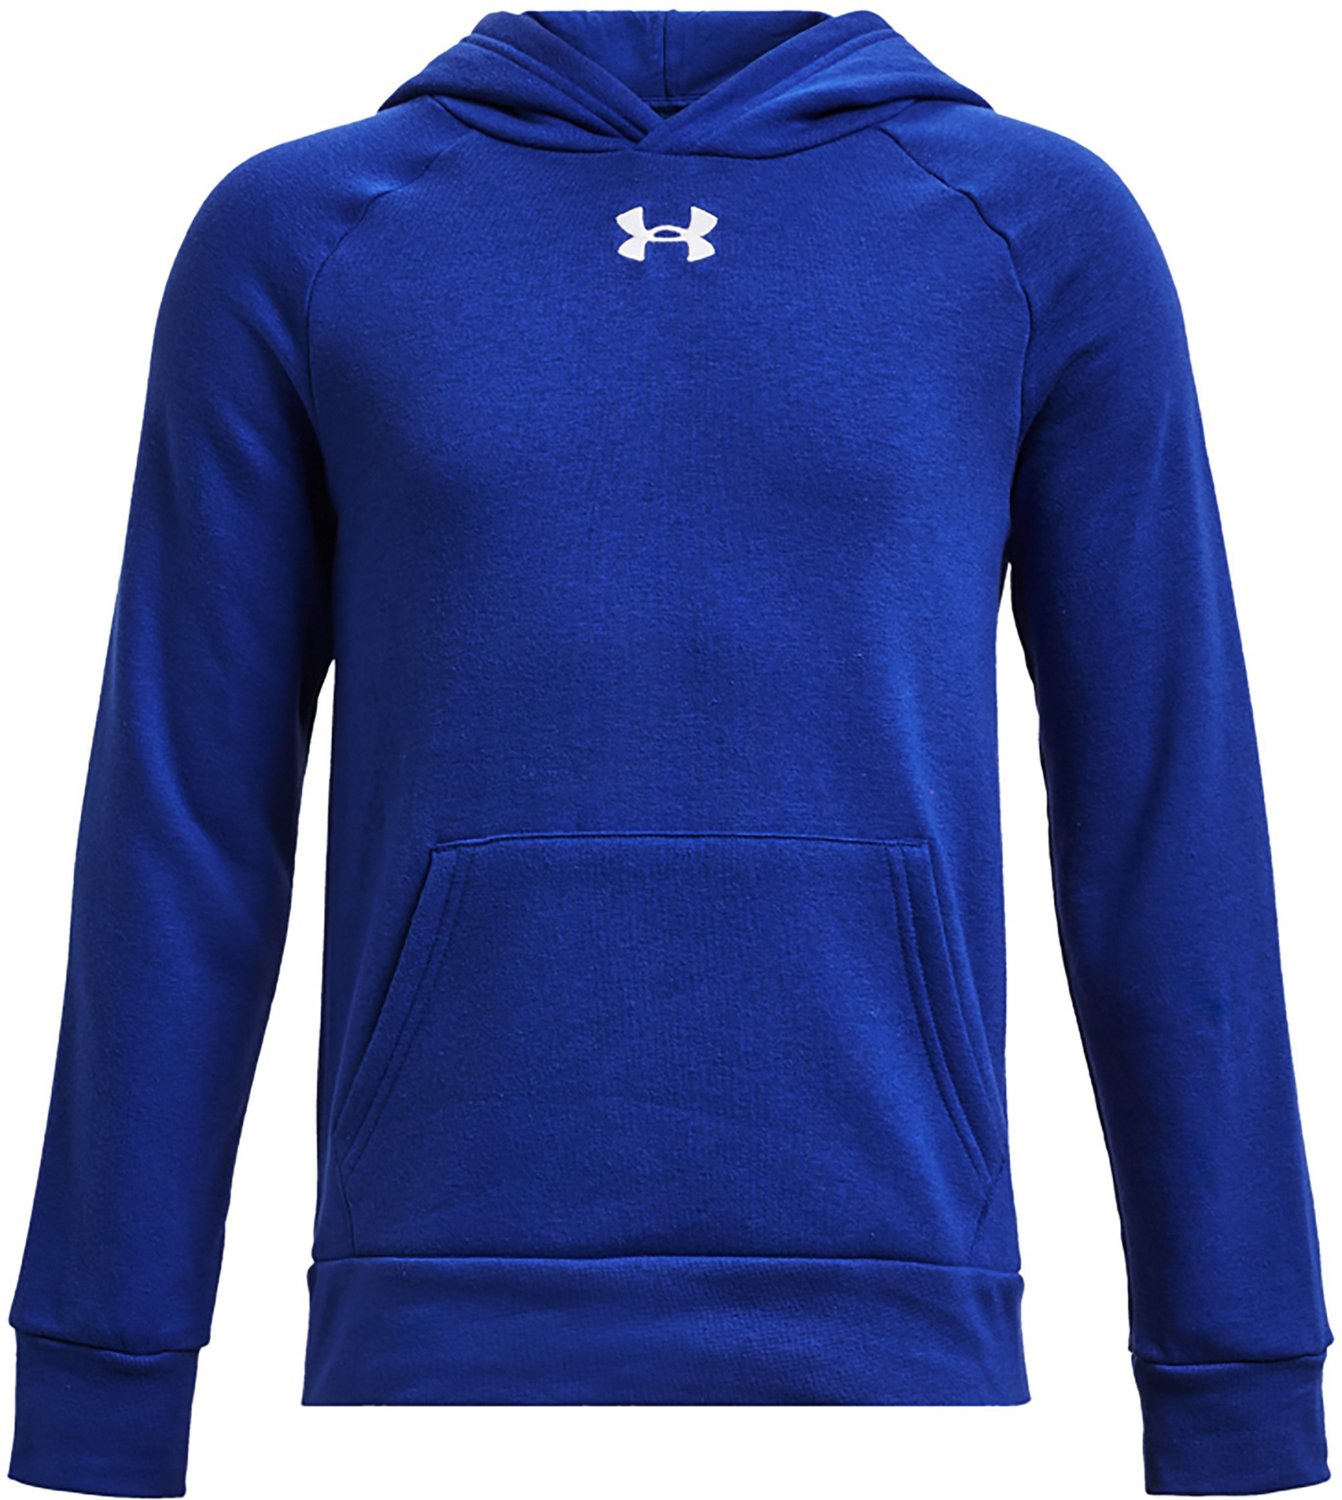 Under Armour Boys' Rival Fleece Hoodie | Free Shipping at Academy